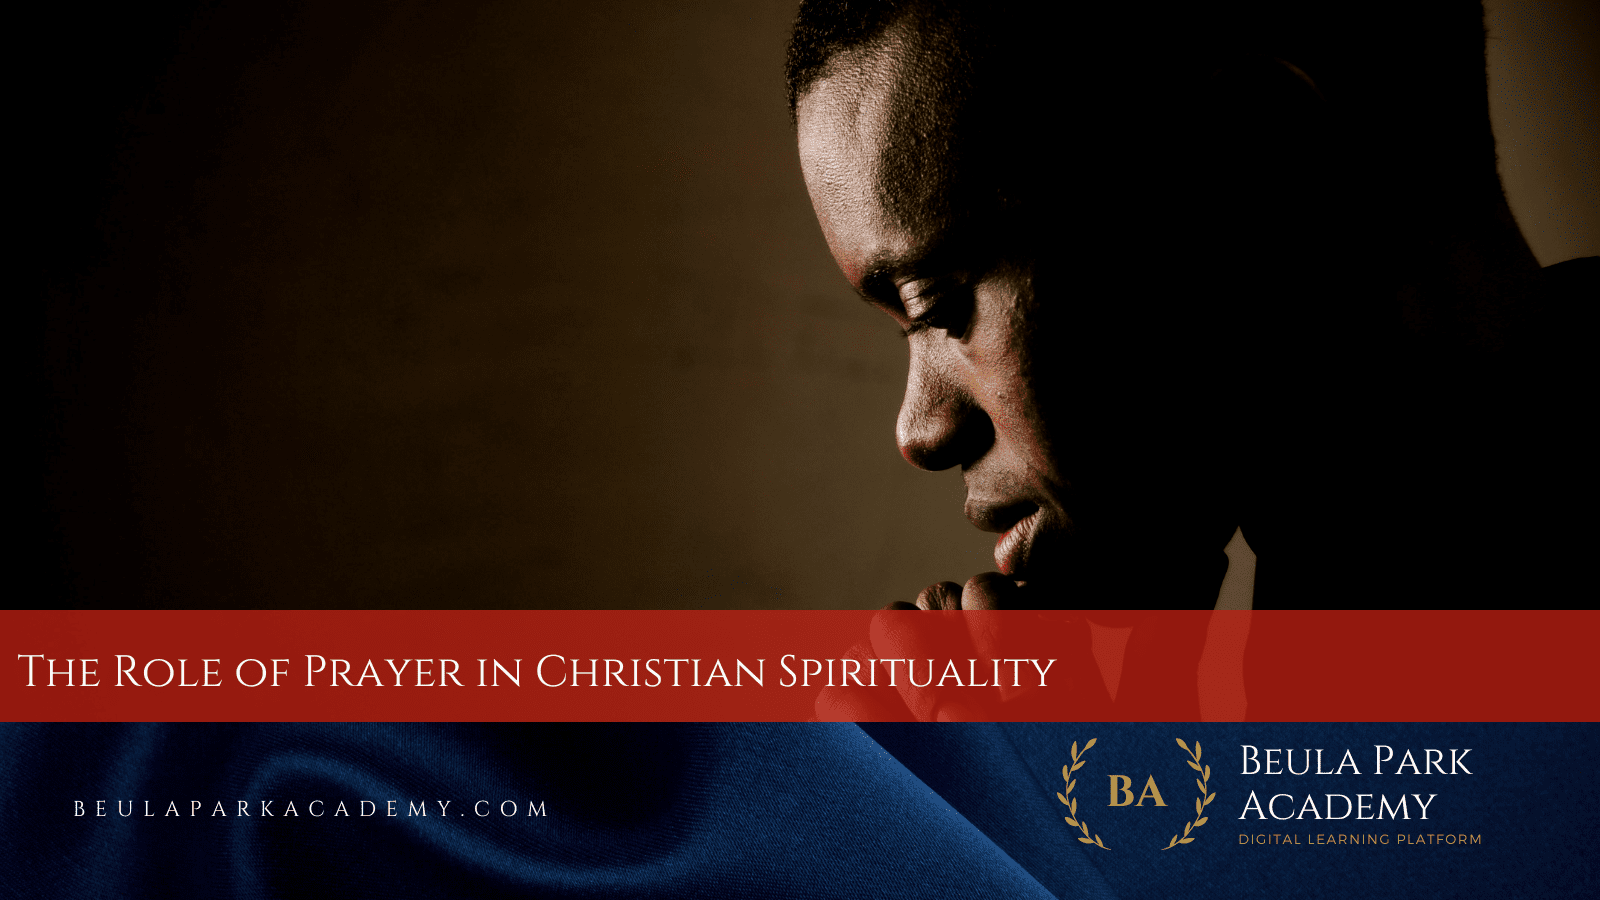 Prayer is a central and essential aspect of Christian spirituality. It is the means by which Christians connect with God and communicate with Him, expressing their thoughts, hopes, fears, and needs. Prayer is not just an individual activity, but it is also a communal one, as Christians come together to pray for one another and for the world. In this article, we will explore the role of prayer in Christian spirituality, and why it is so important for Christians to make prayer a regular part of their lives.